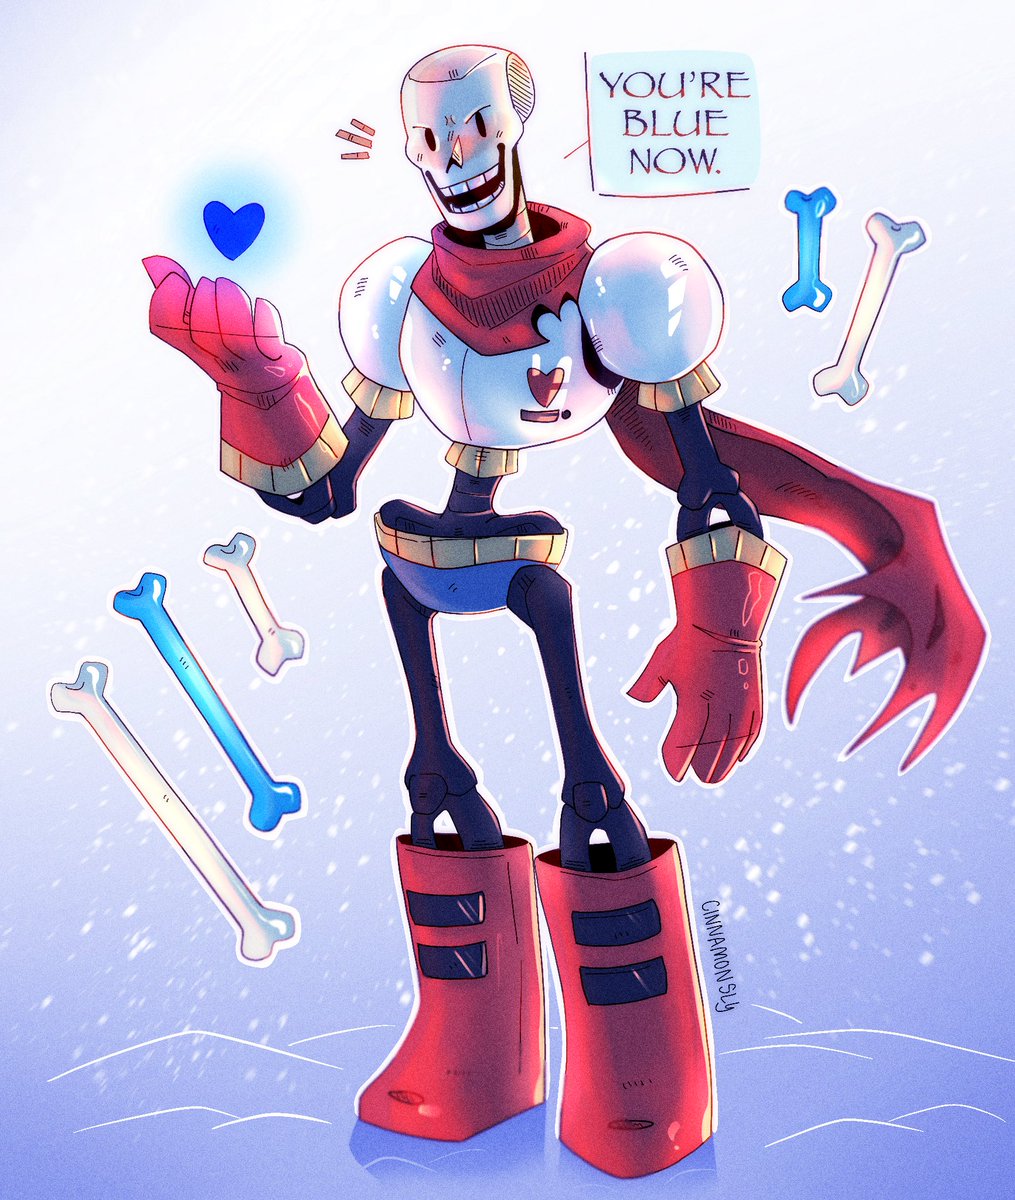 i lied. decided to finish this anyway, i needed something to help calm me down today.

#papyrus #undertale #papyrusundertale